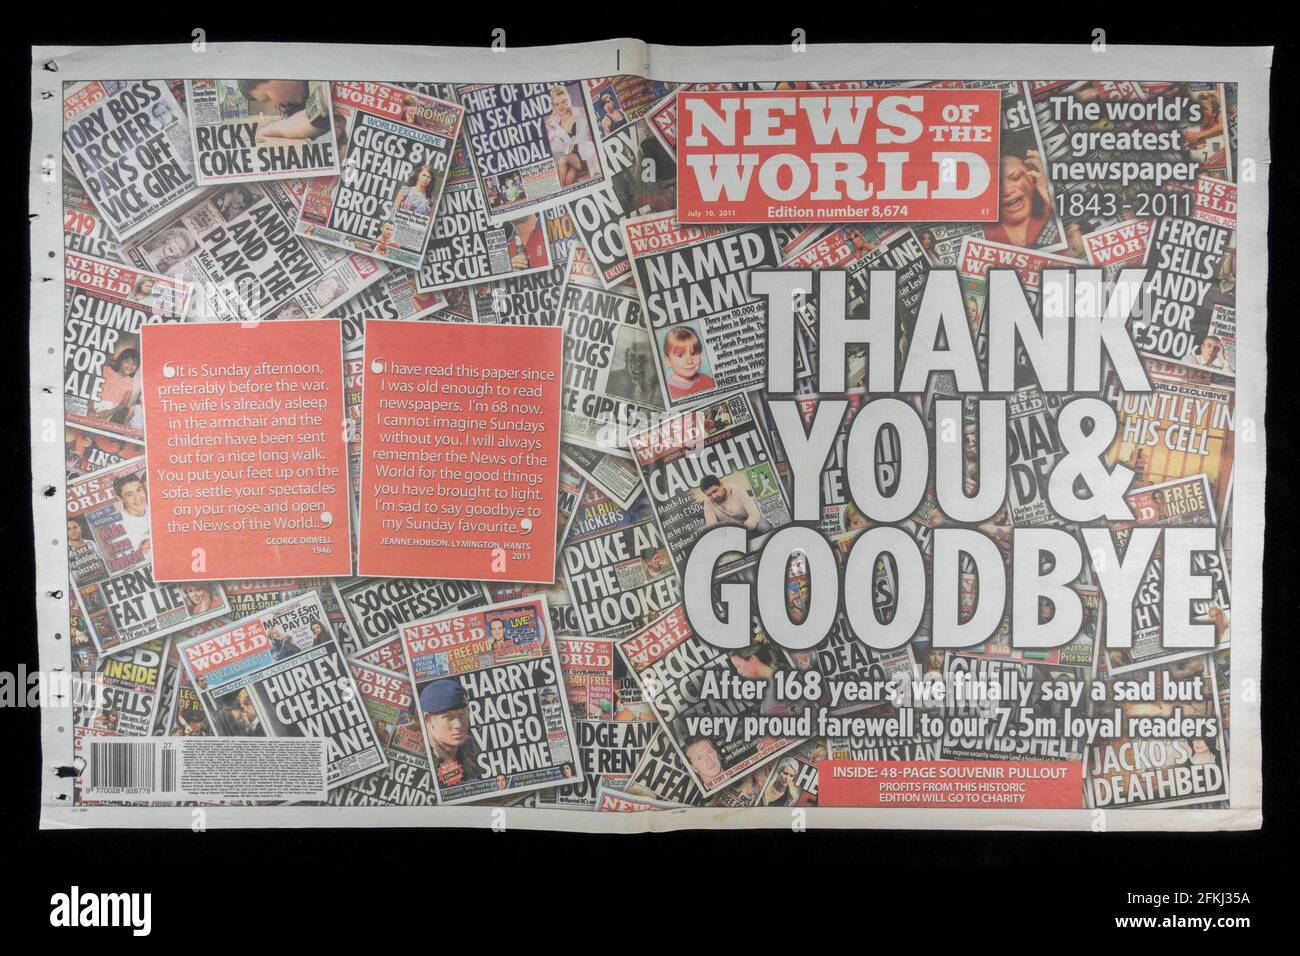 Double page front page "Thank You & Goodbye" on the final publication  of the News of the World newspaper on 10th July 2011. Stock Photo